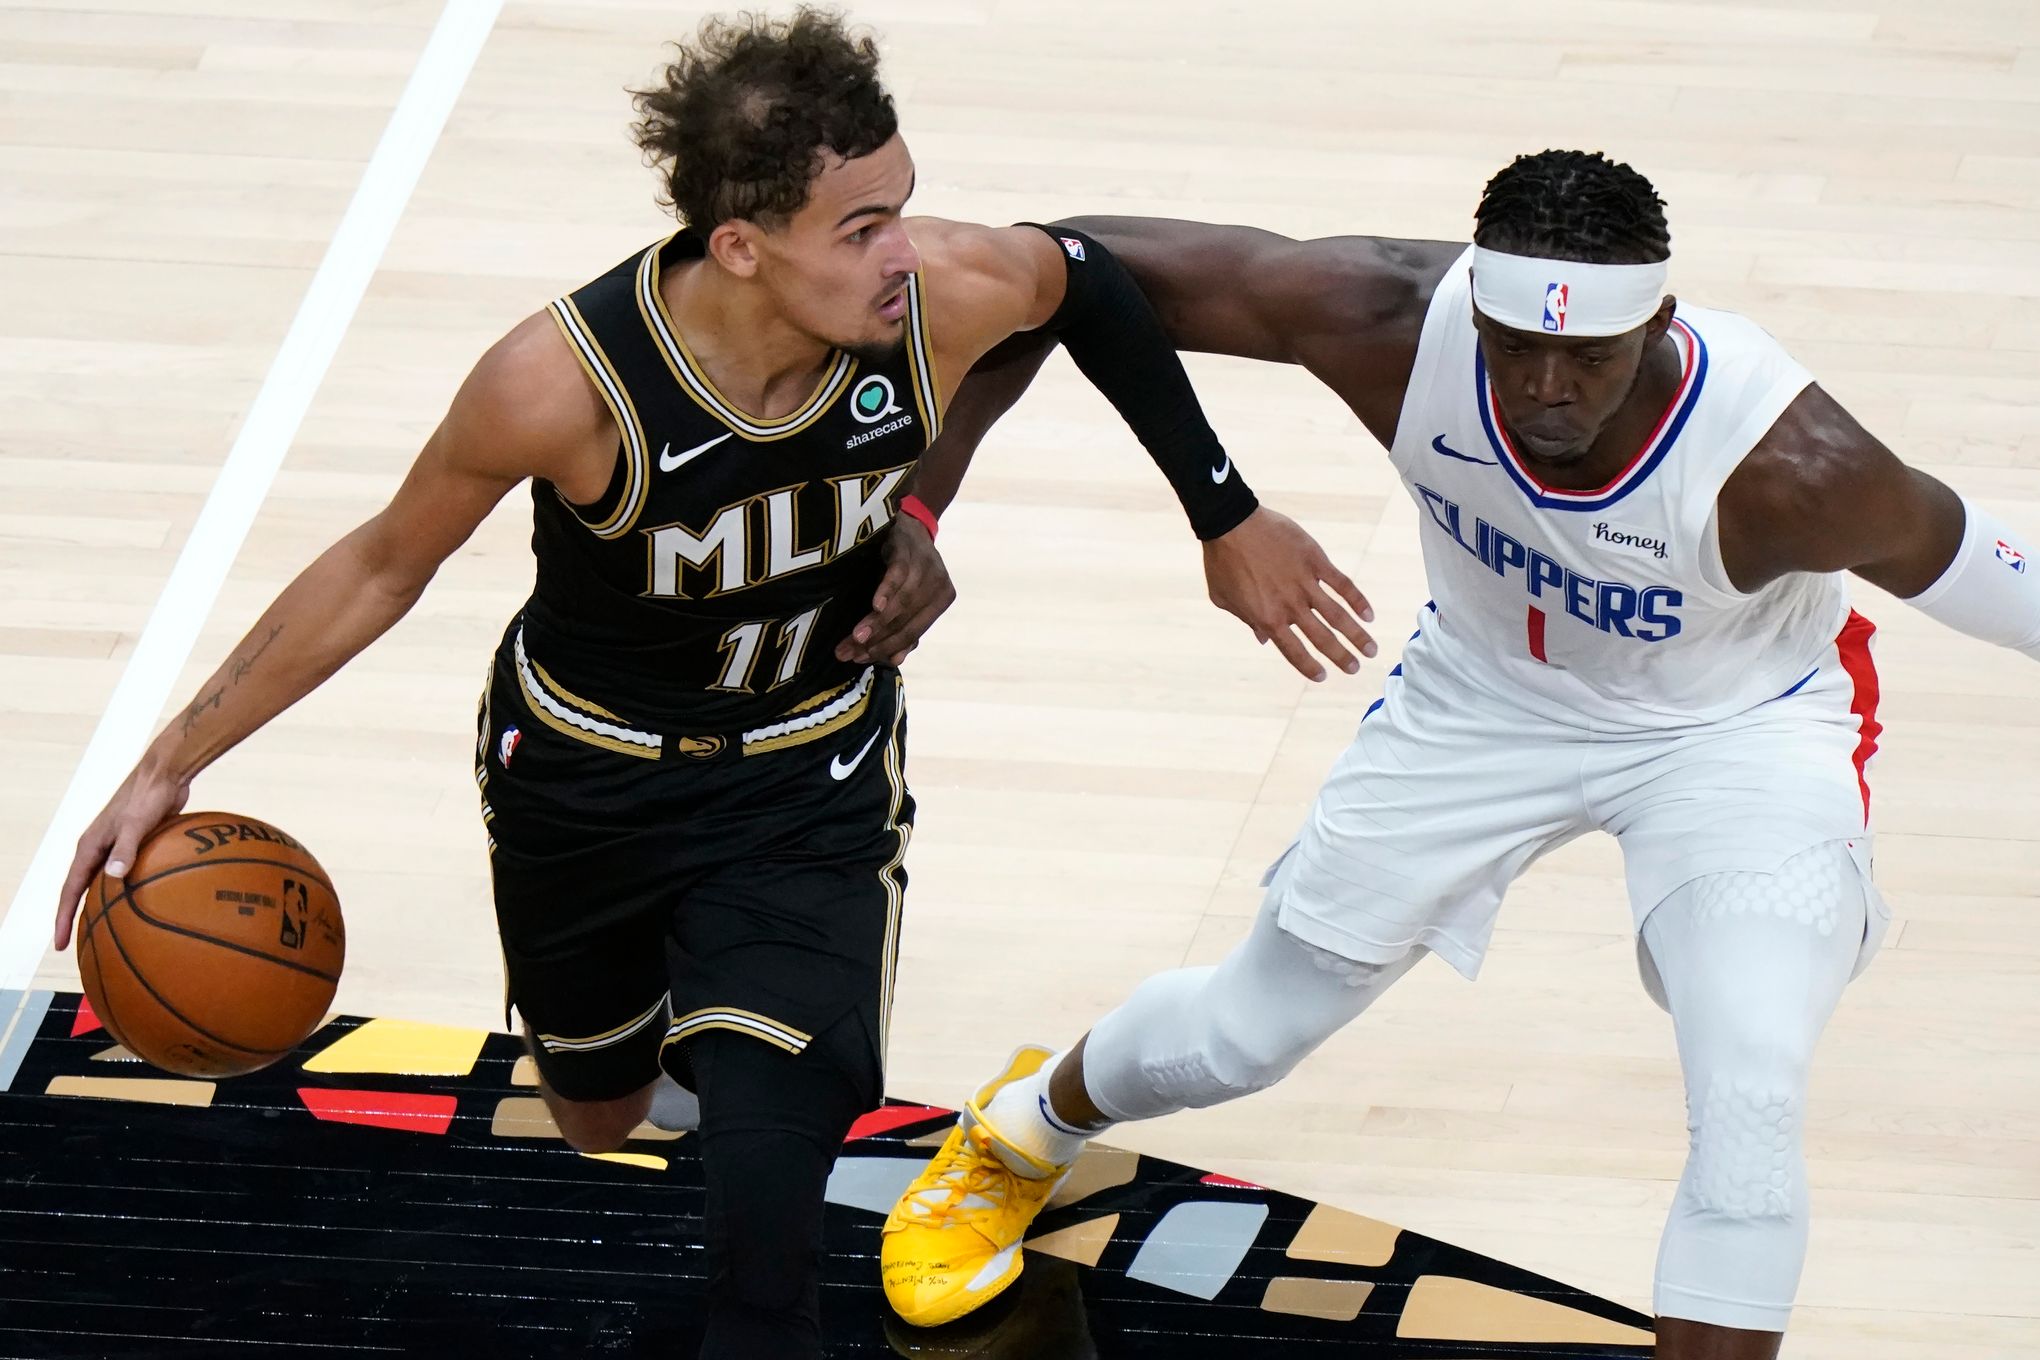 Why Do the Clippers Have Honey on Their Jerseys? Answers Inside